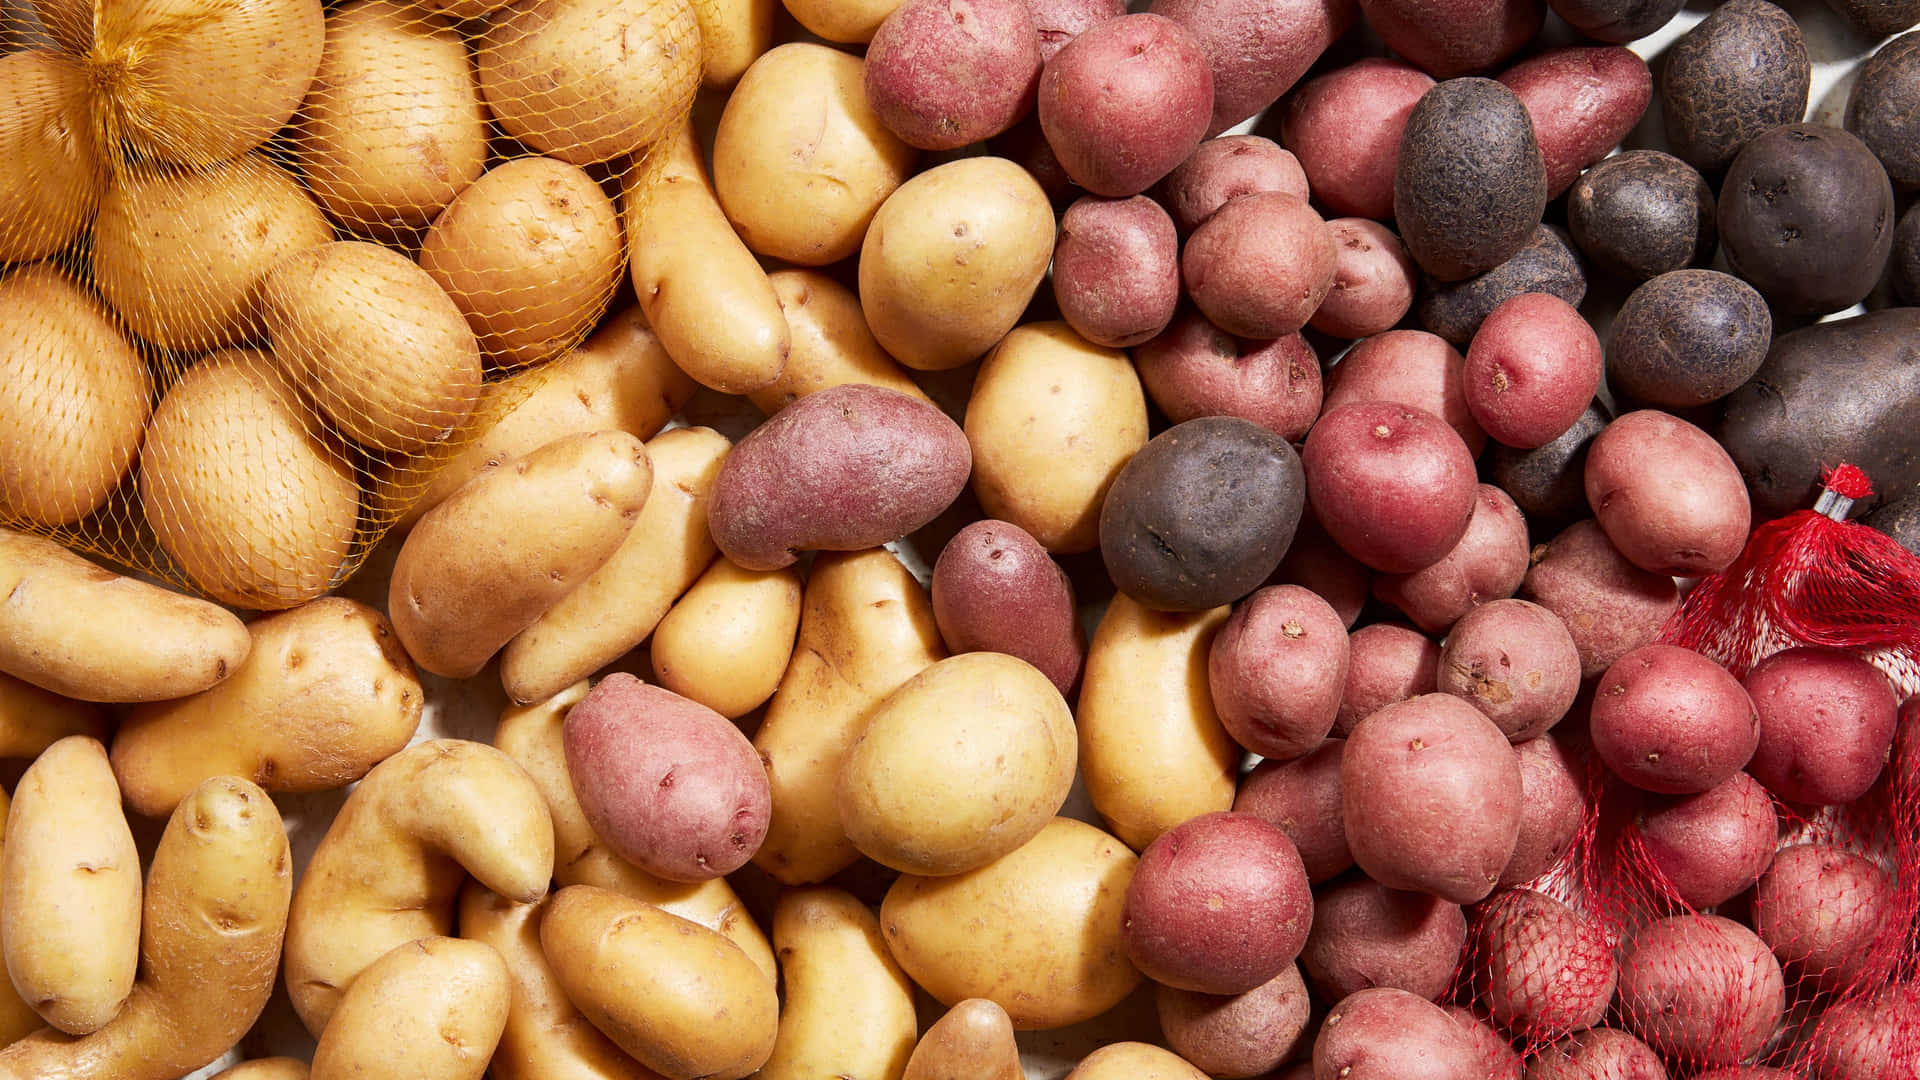 A Vibrant Pile of Fresh Red Potatoes Wallpaper